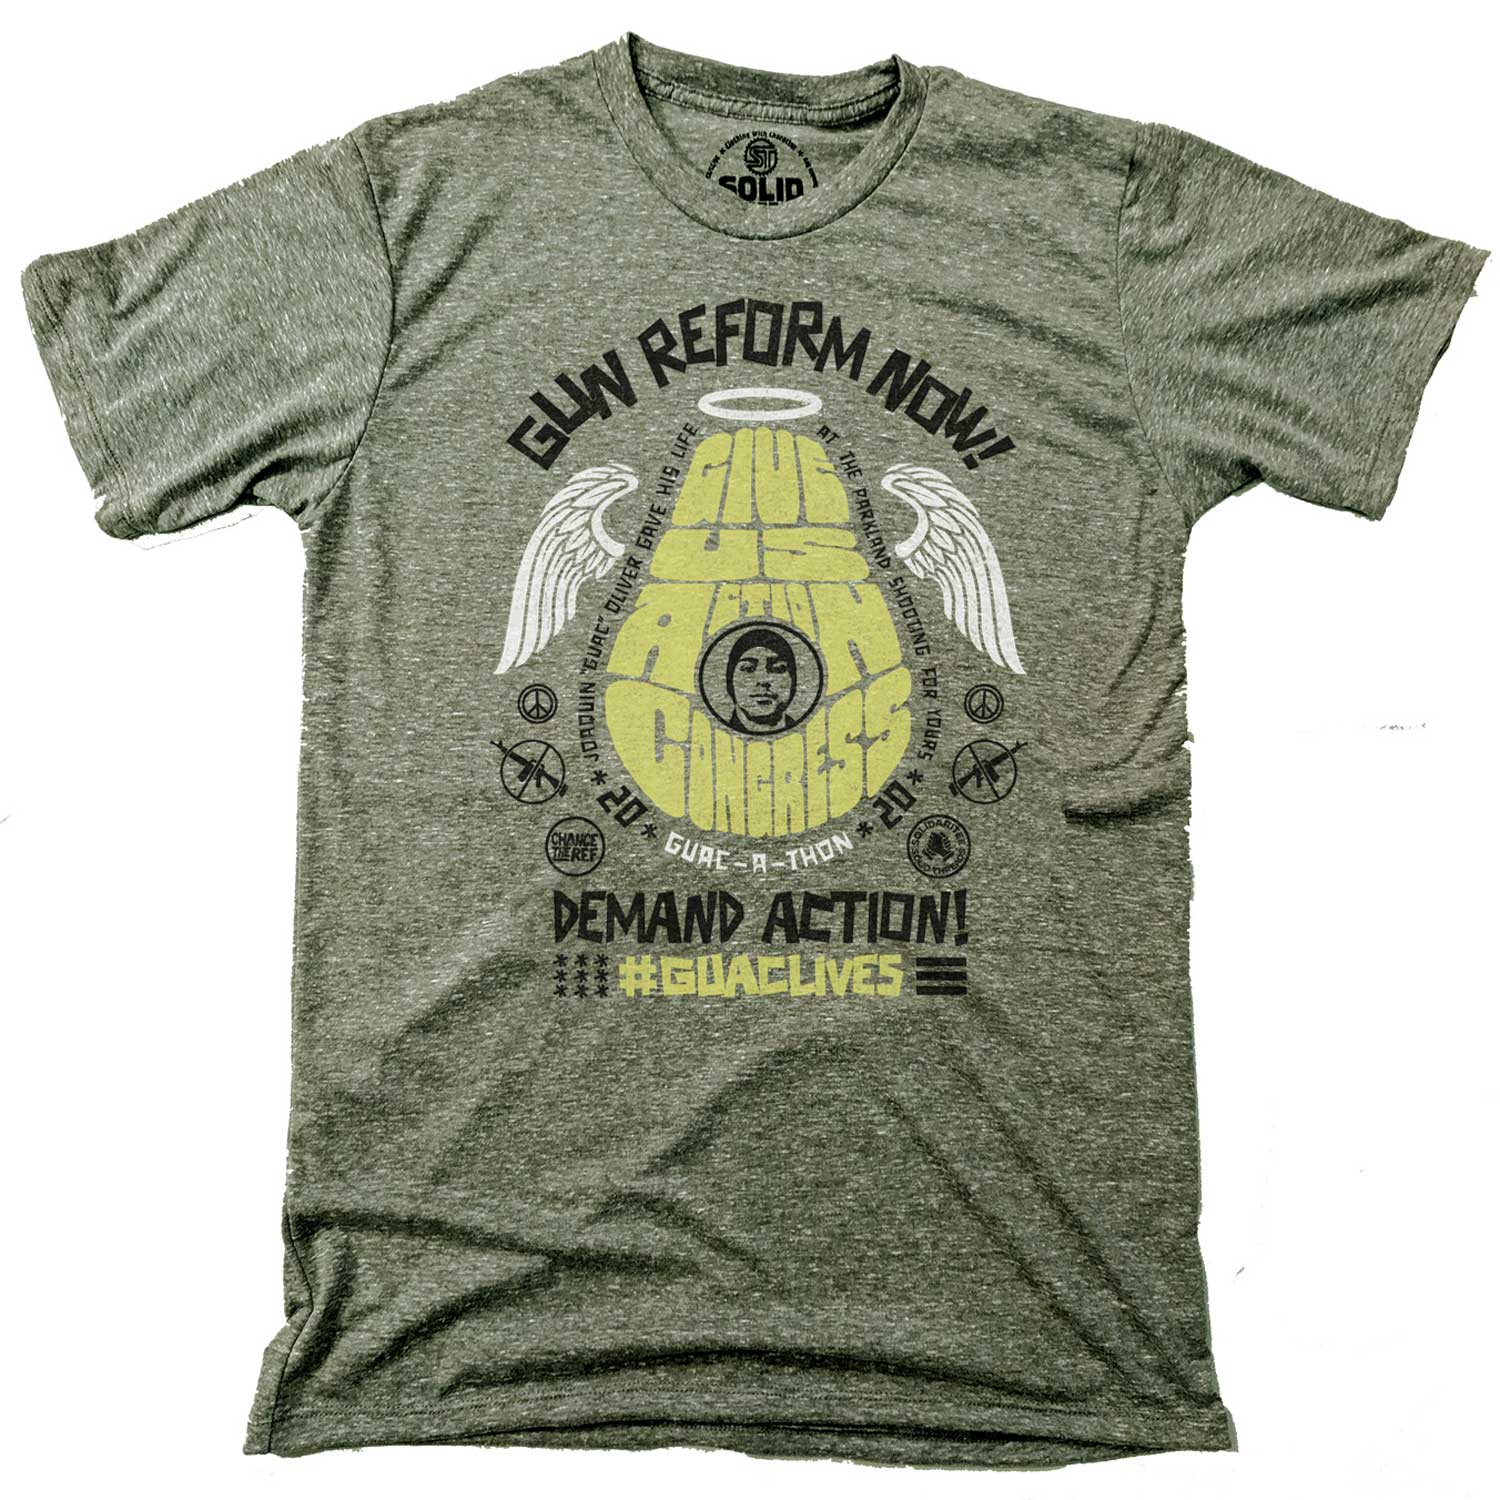 Men's Guac live give us action congress vintage inspired gun reform tee shirt with cool retro protest graphic | #GUAClives in SolidariTEE with Change The Ref